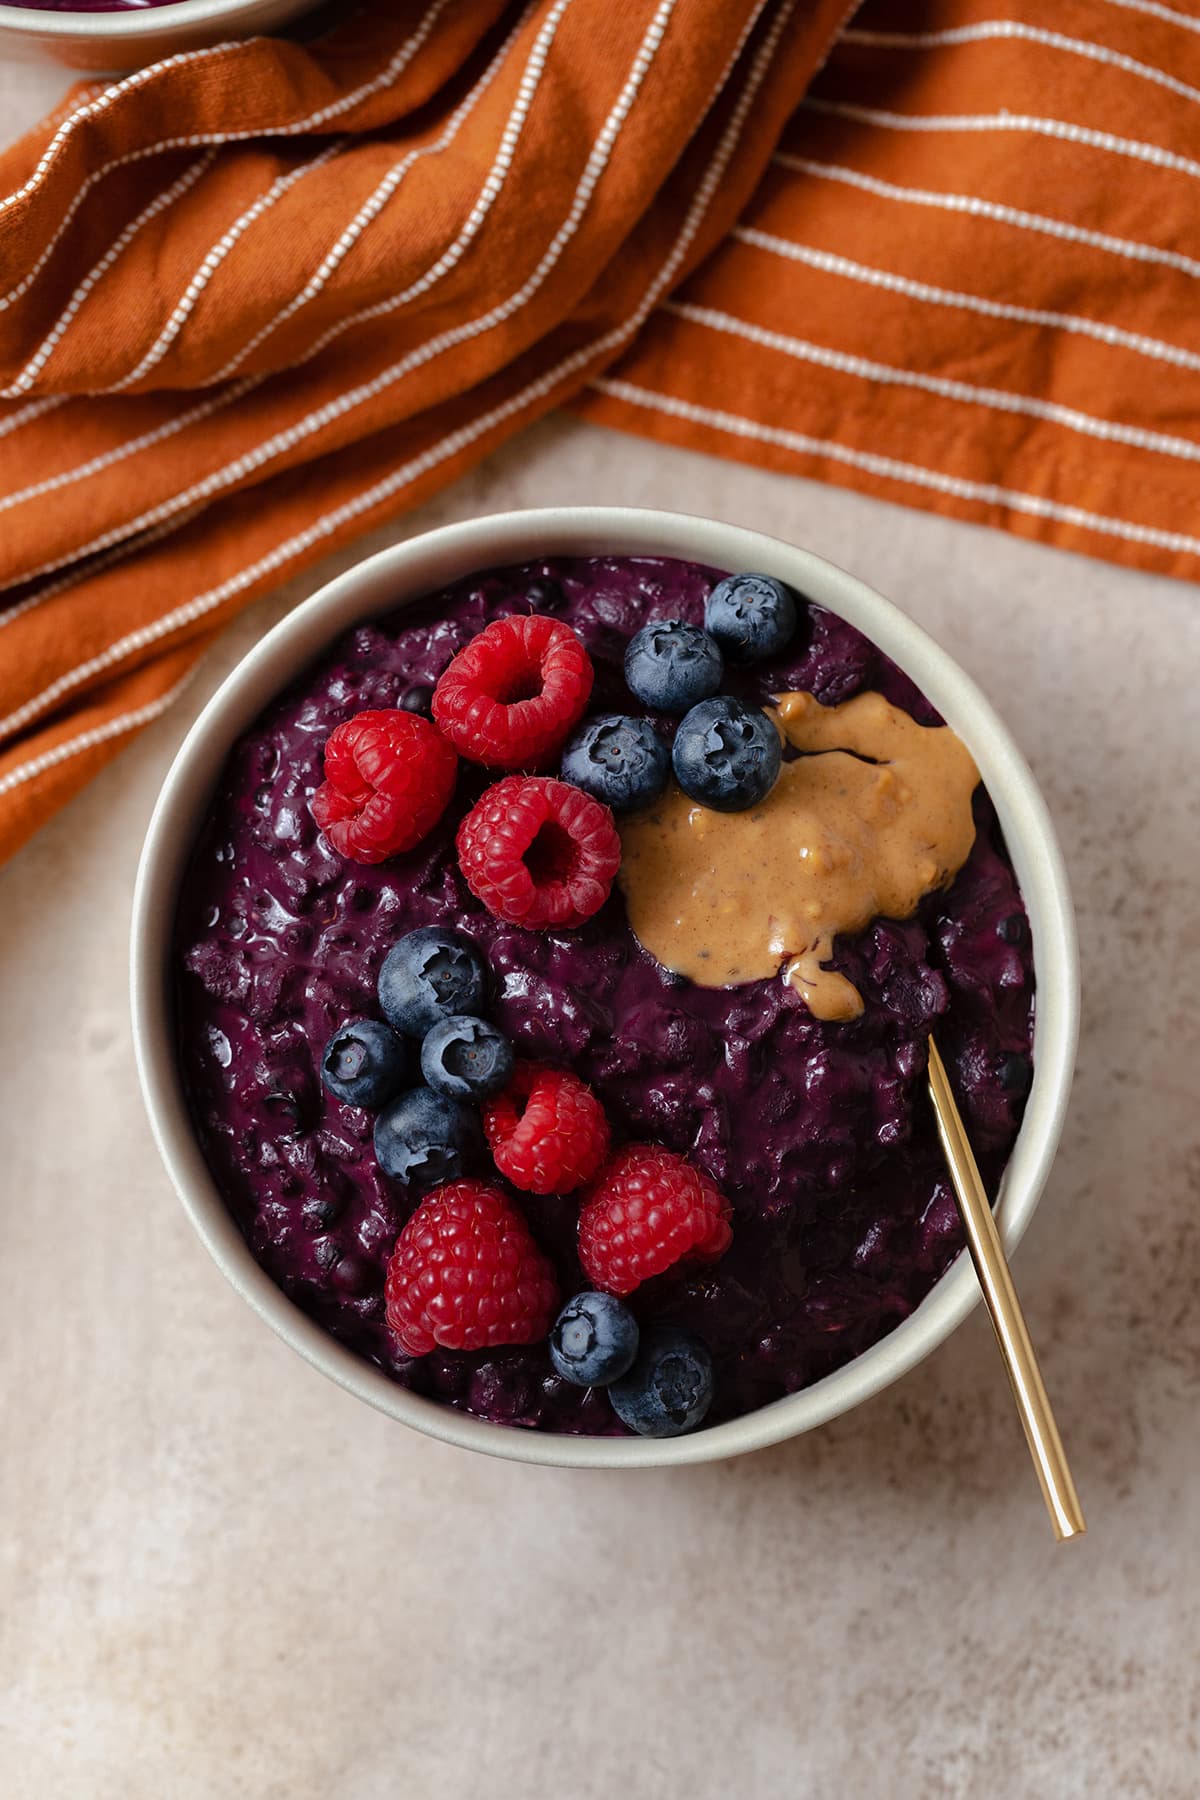 A beige bowl full of dark purple oatmeal topped with raspberries and blueberries. Gold spoon on the right side of the bowl.